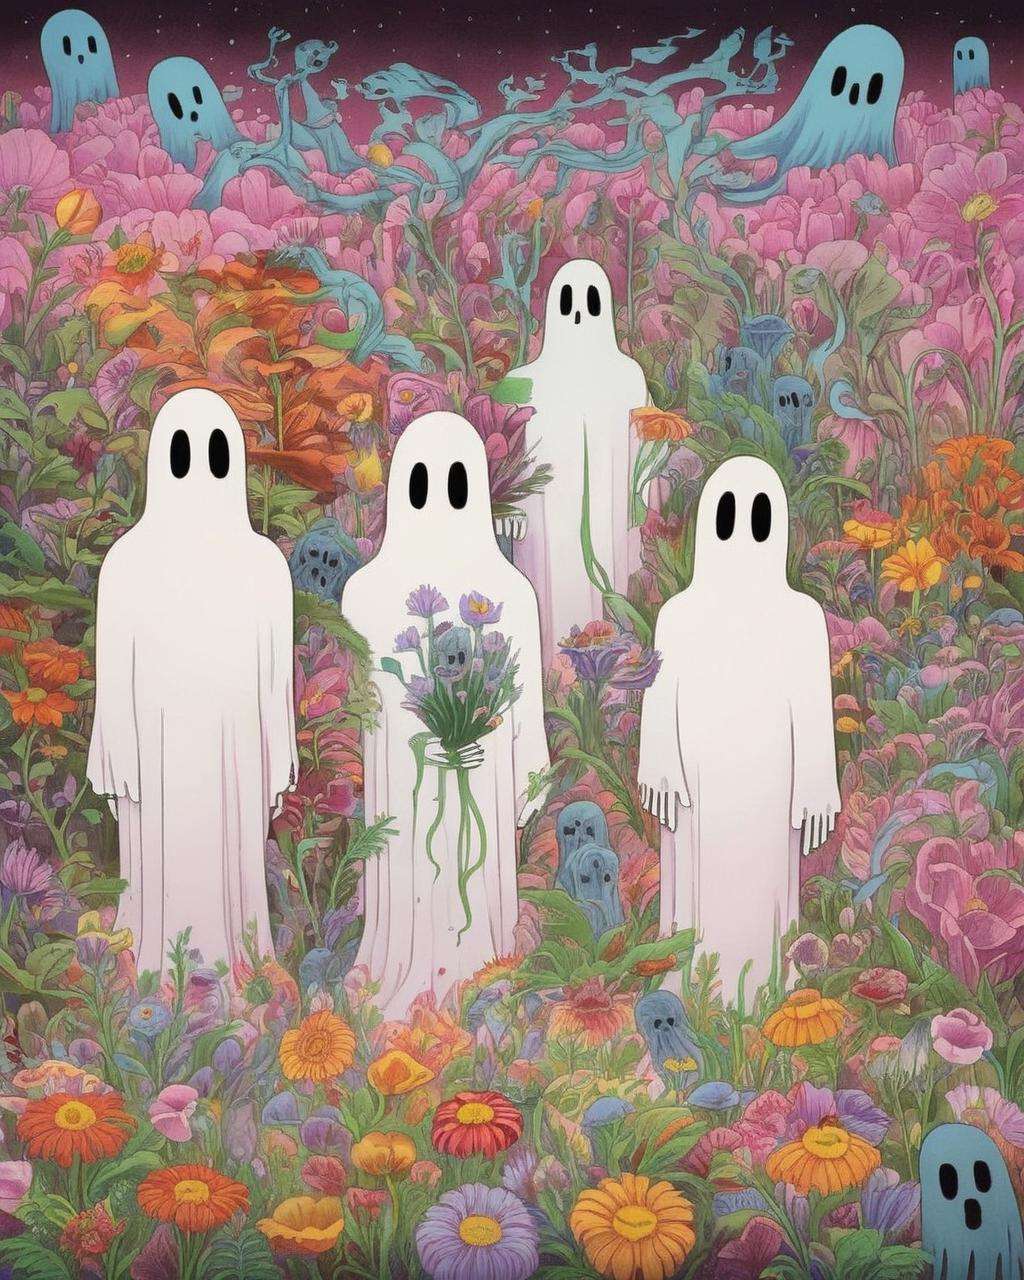 a painting of ghosts a field of flowers and plants, Chris LaBrooy, detailed illustration, an album cover, psychedelic art<lora:MindWarp:1.0>